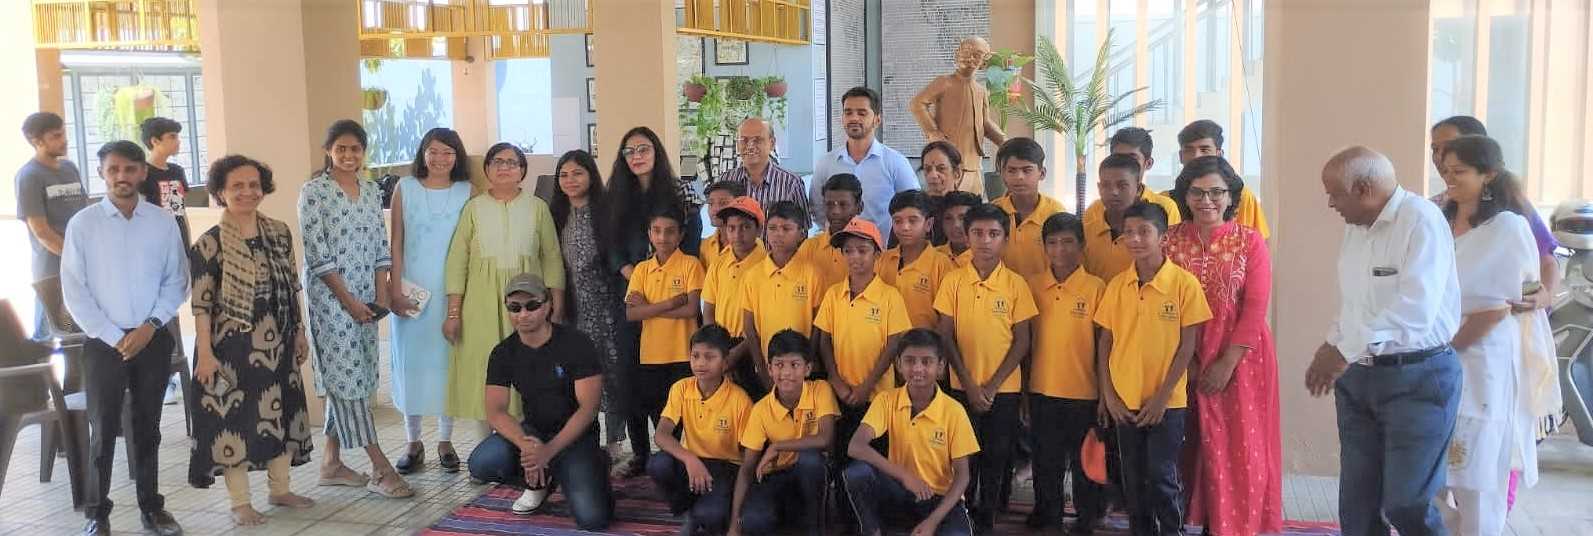 Pune Celebrates Museum Day with Enthusiasm at R K Laxman Museum in Baner